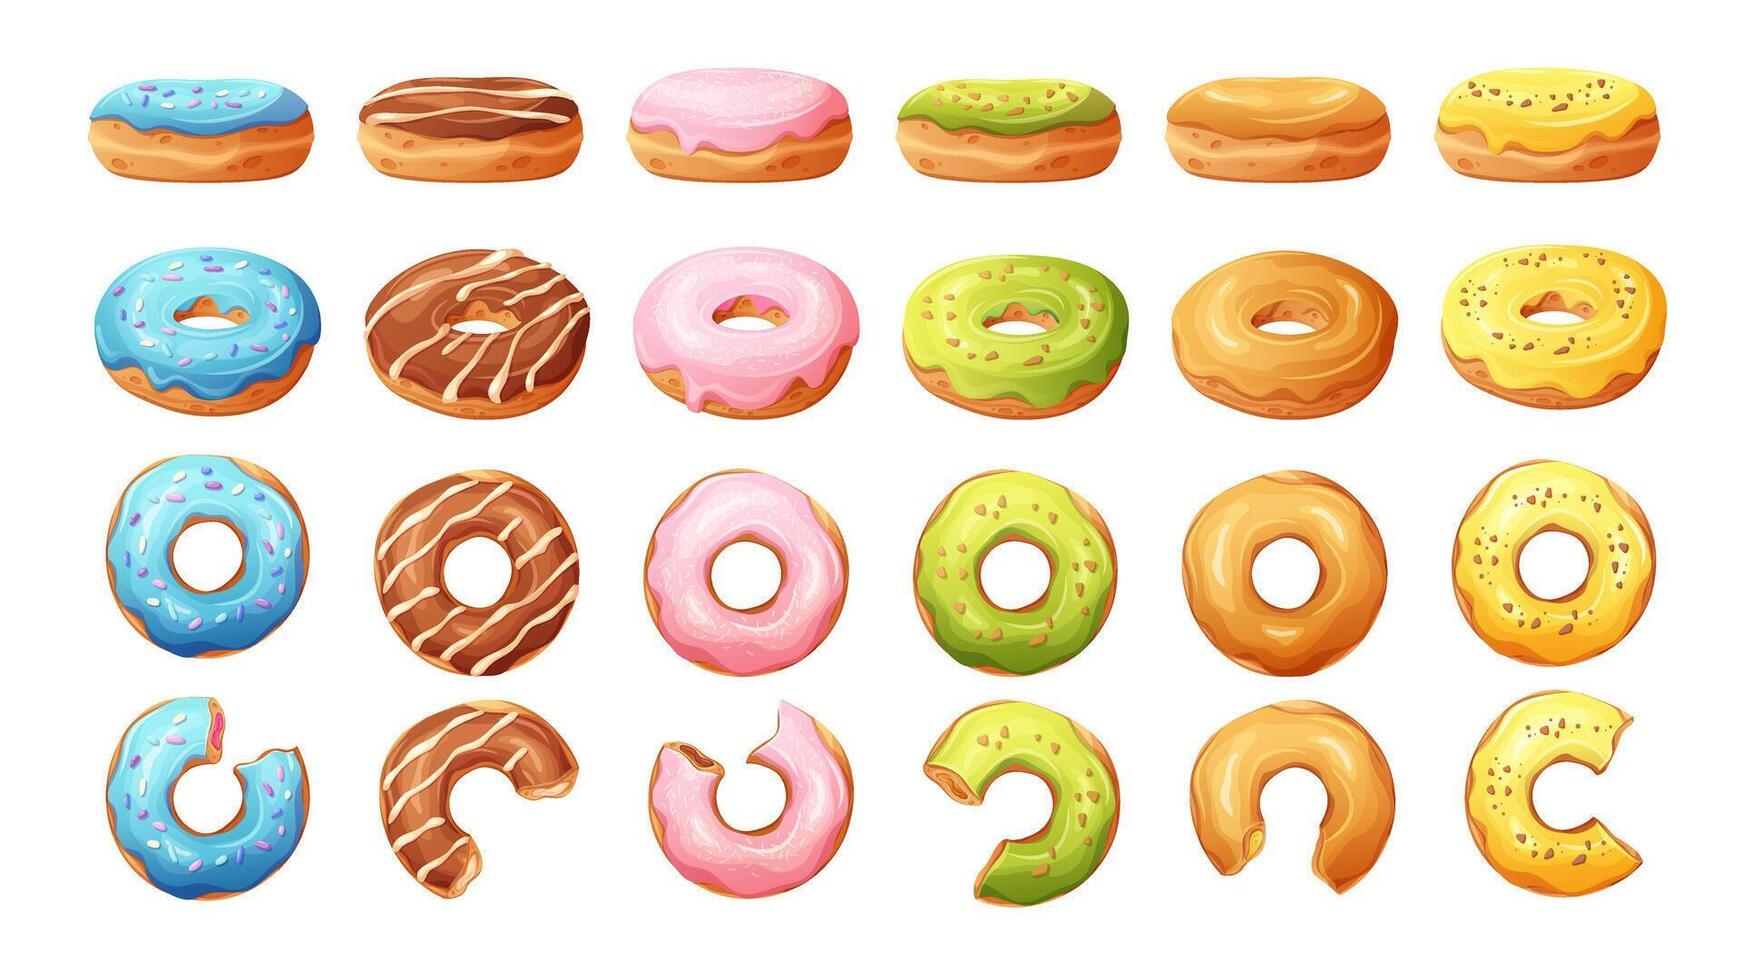 Collection of delicious cartoon donuts with glaze in different twists and turns. Donut side view, turned, top view, bite off. illustration vector